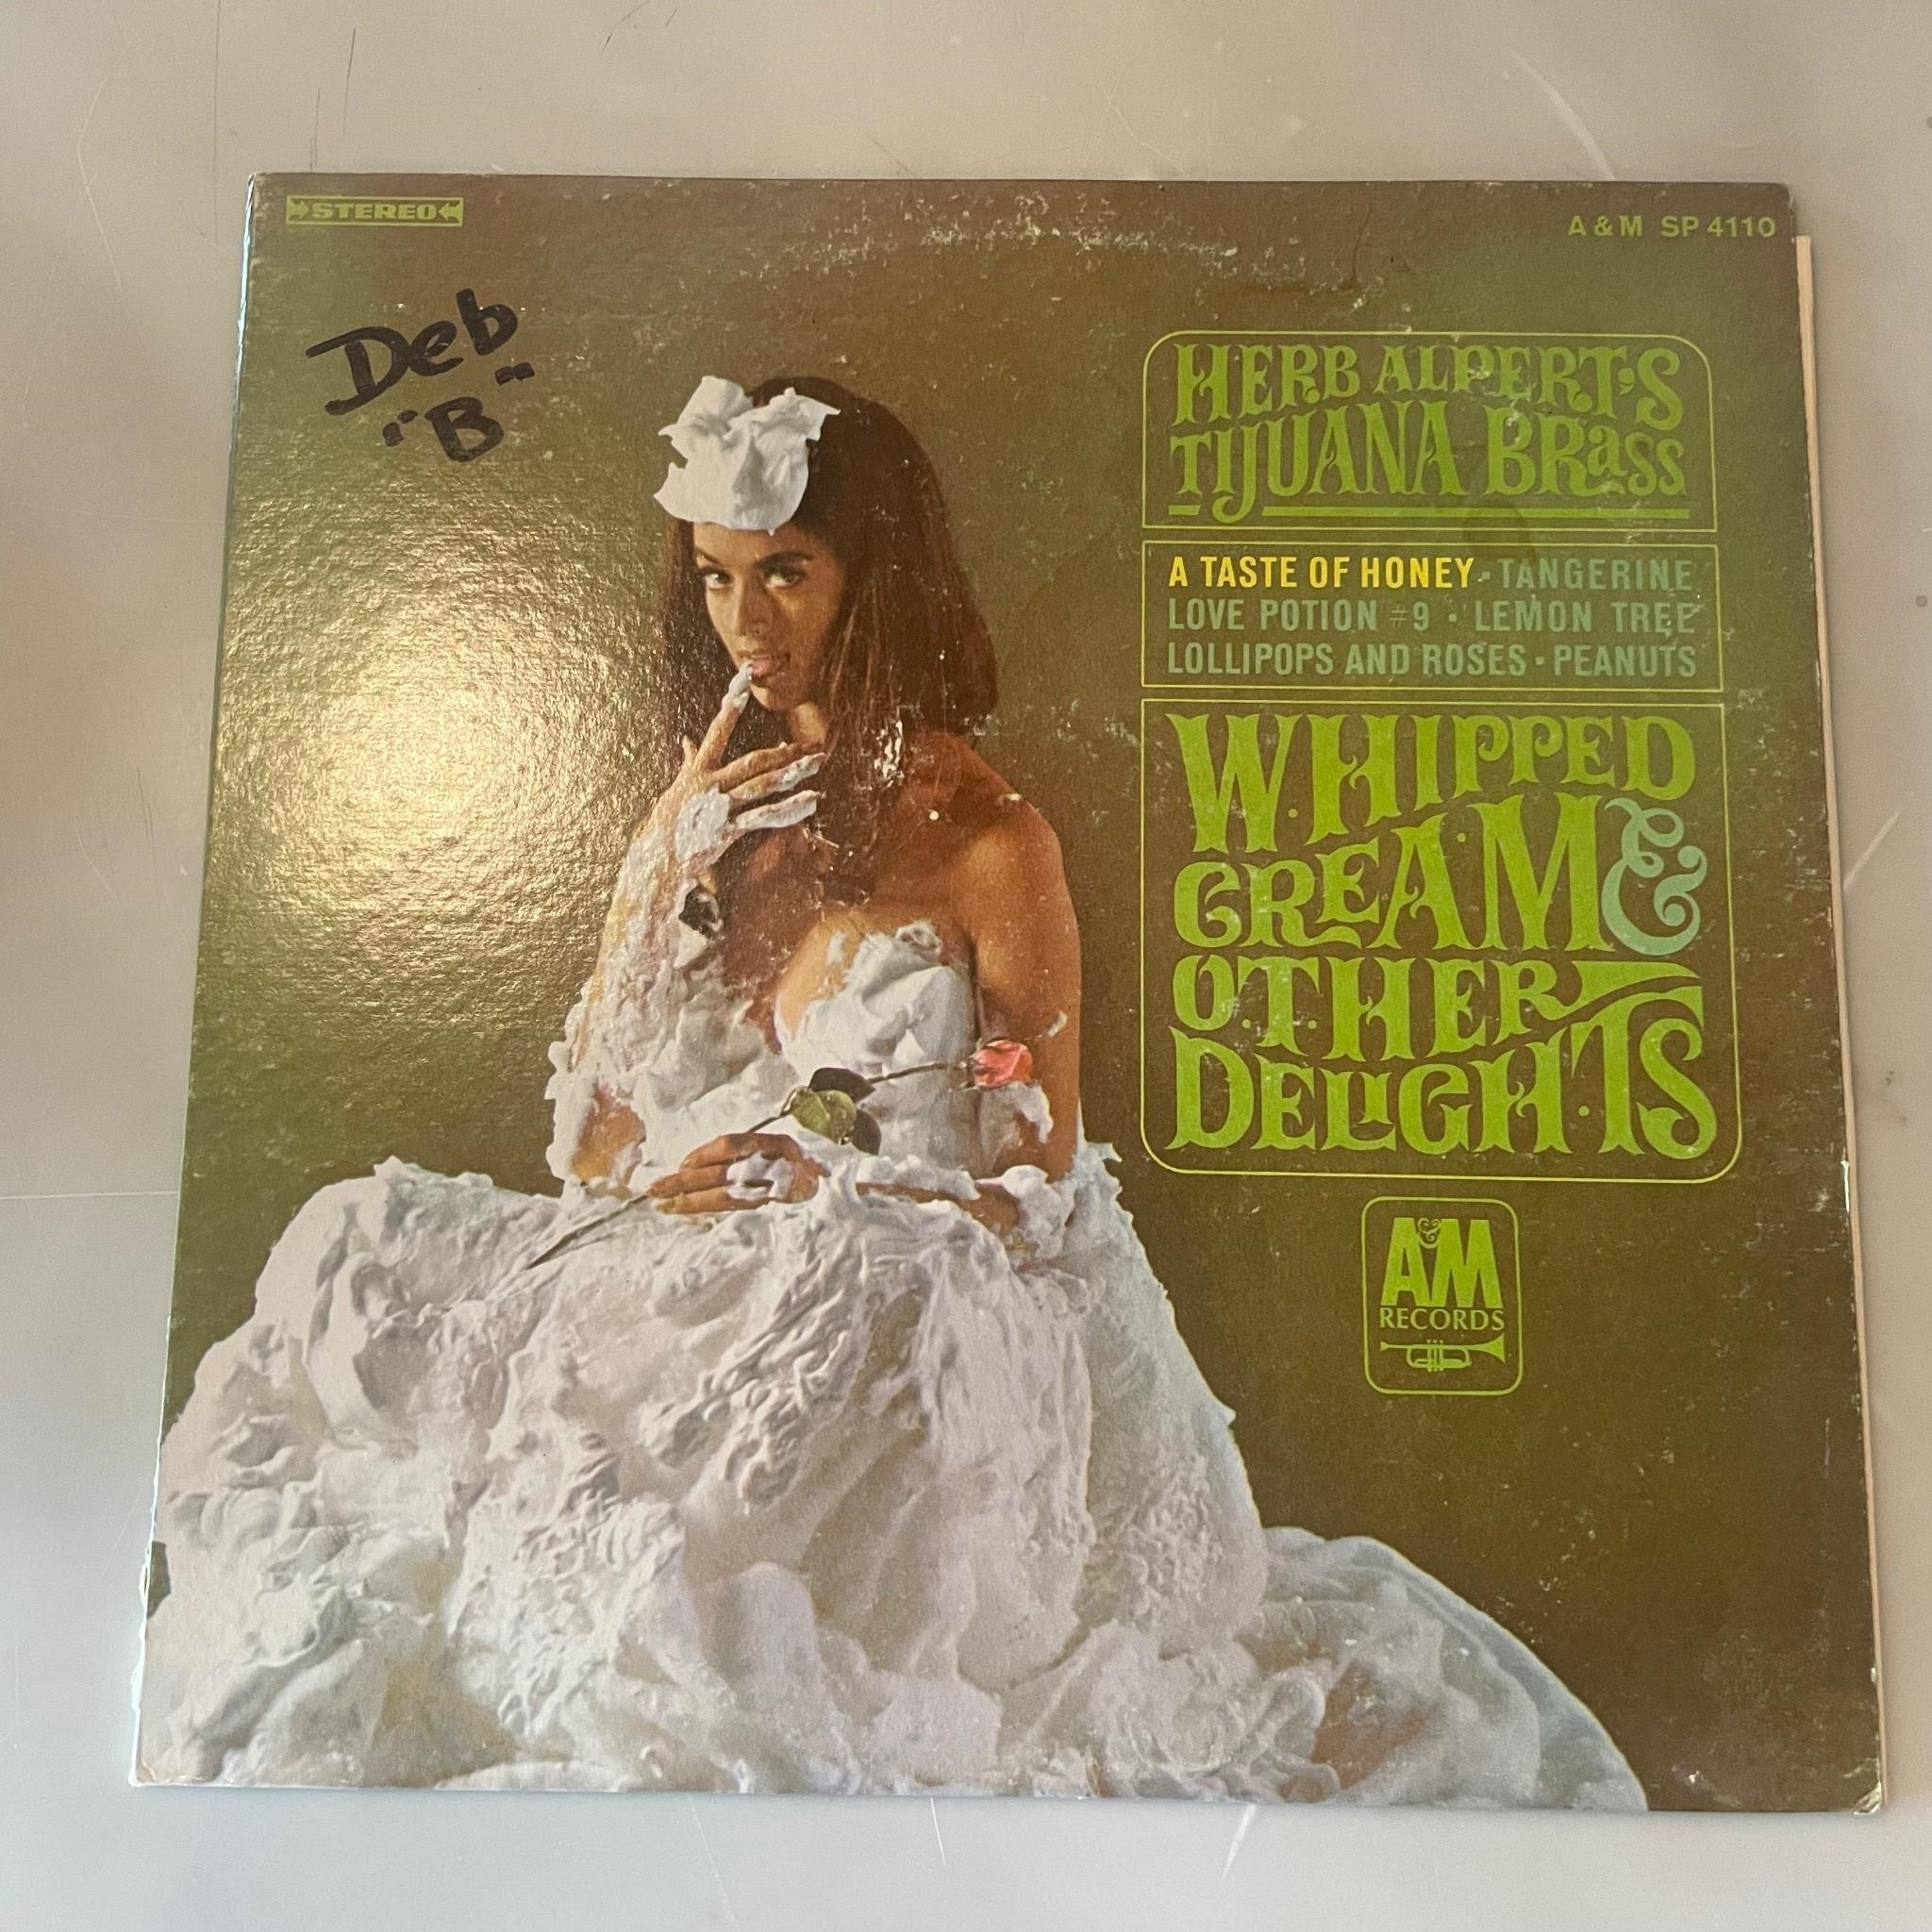 MAY VINYL RECORD Weekly auction UNLIMITED $12 SHIPMENT